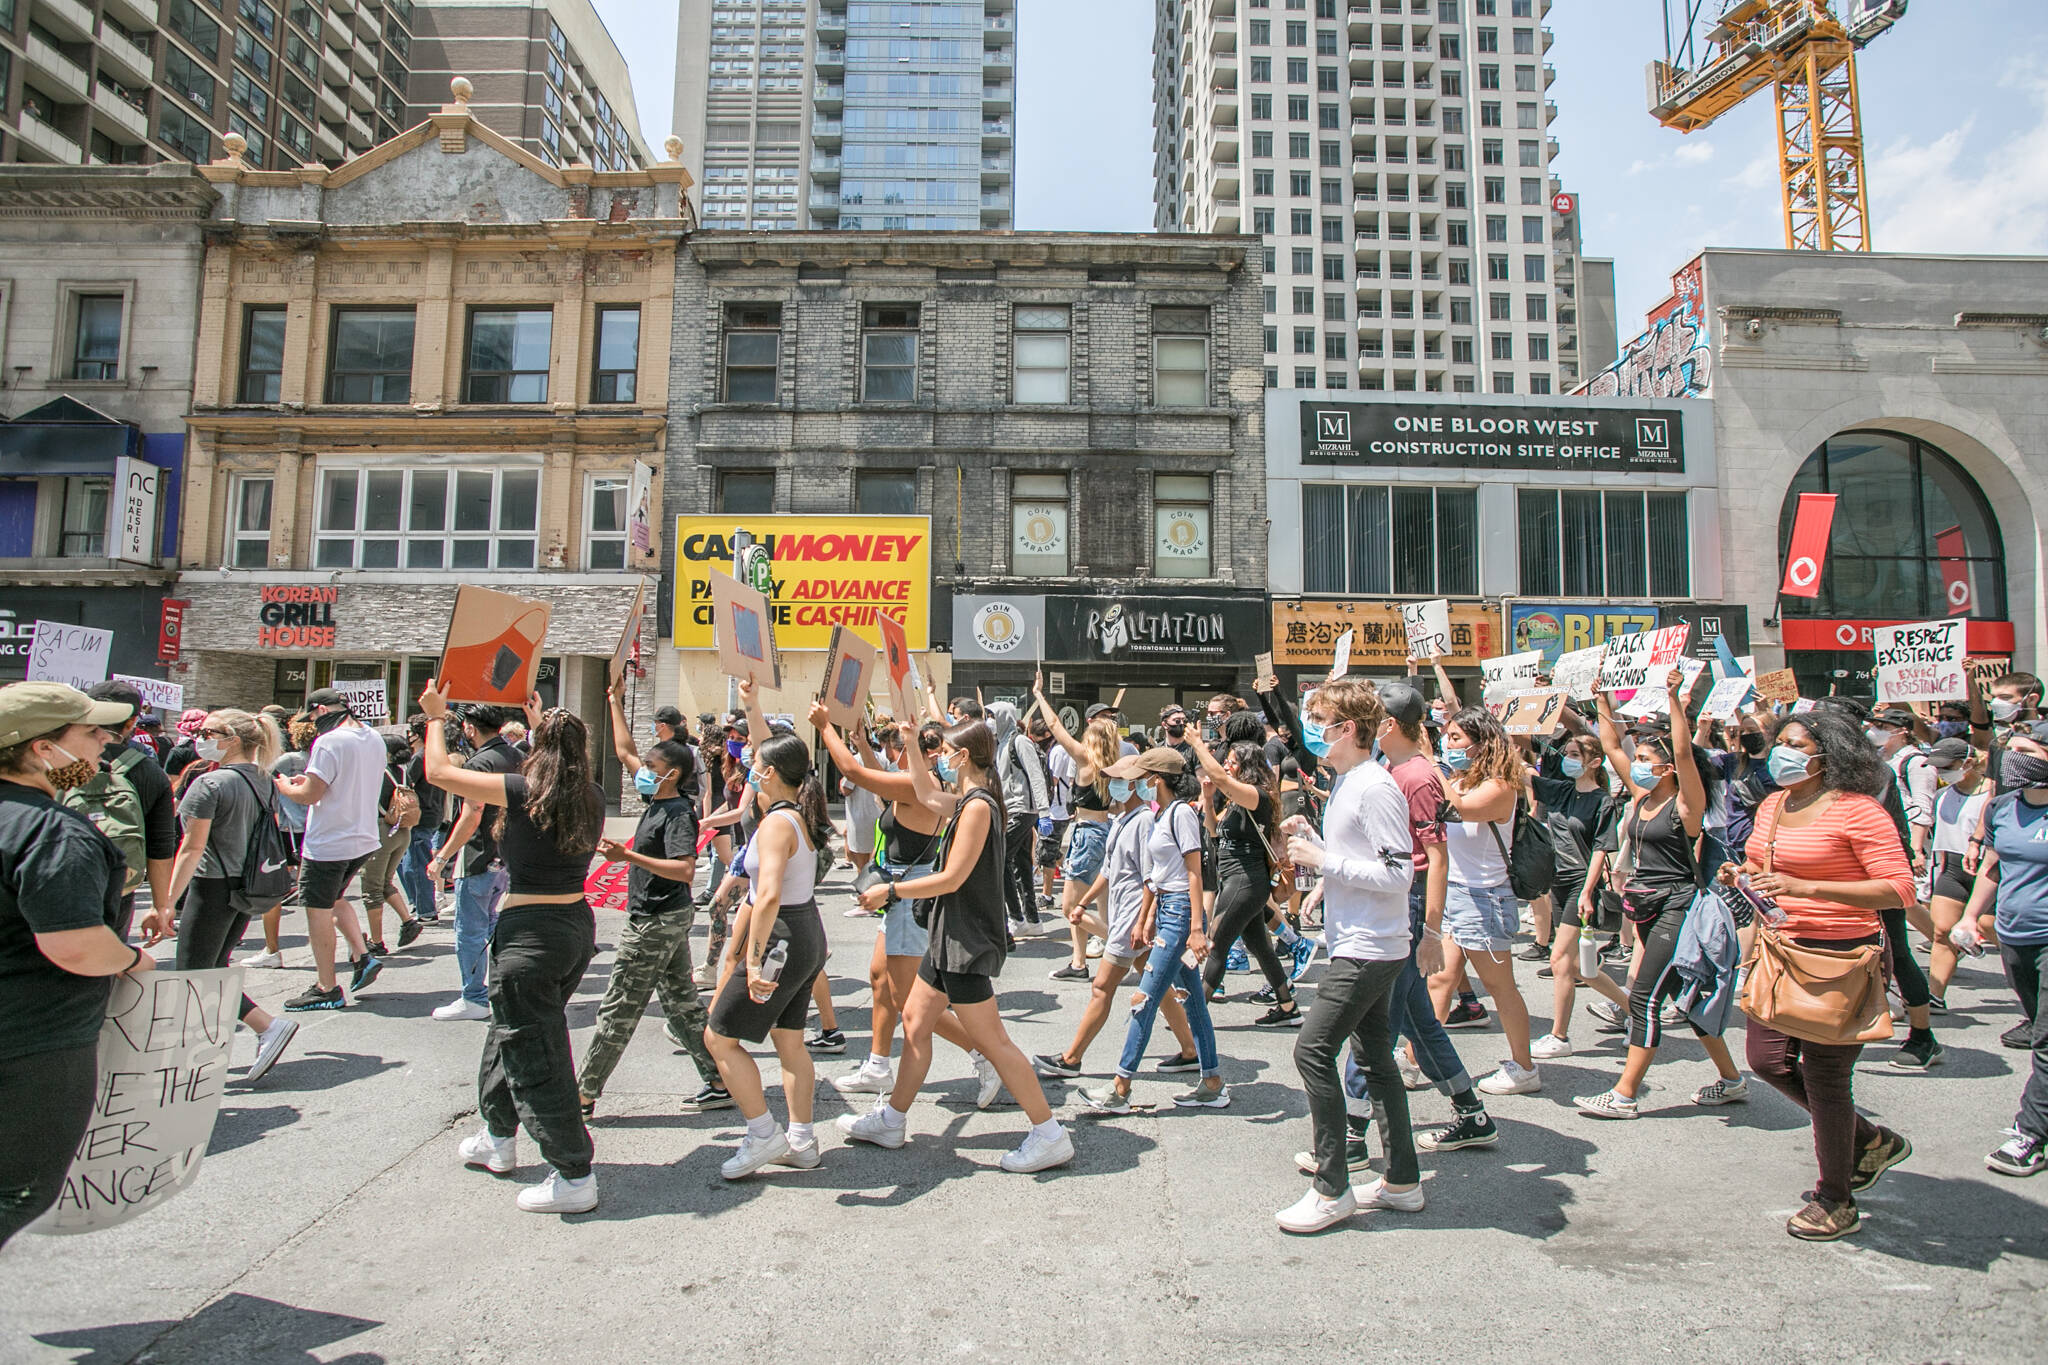 Toronto protest today might have been unsanctioned but thousands still